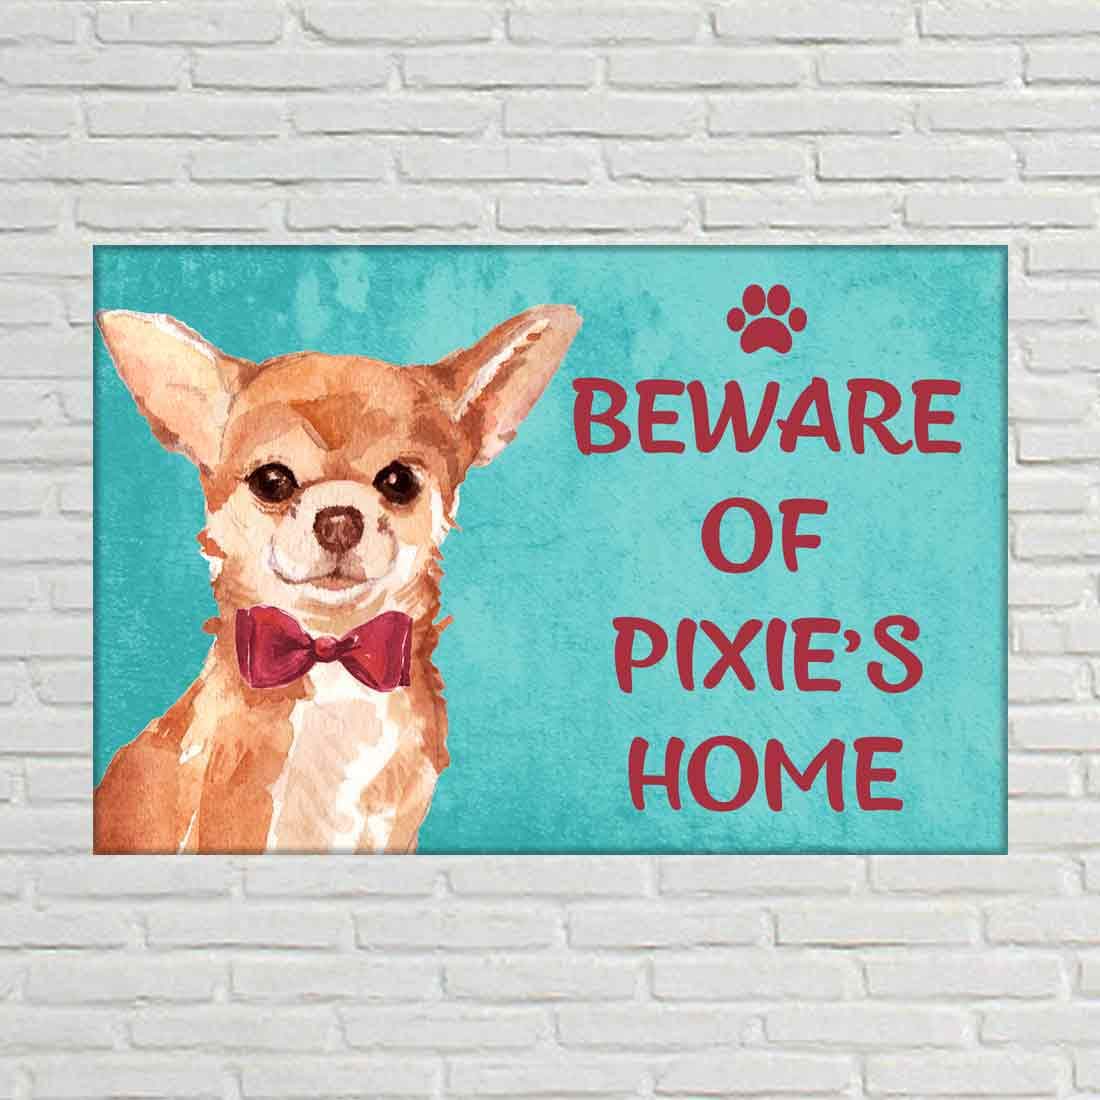 Customized Dog Name Plate - Beware Of Dog Sign - Chihuahua